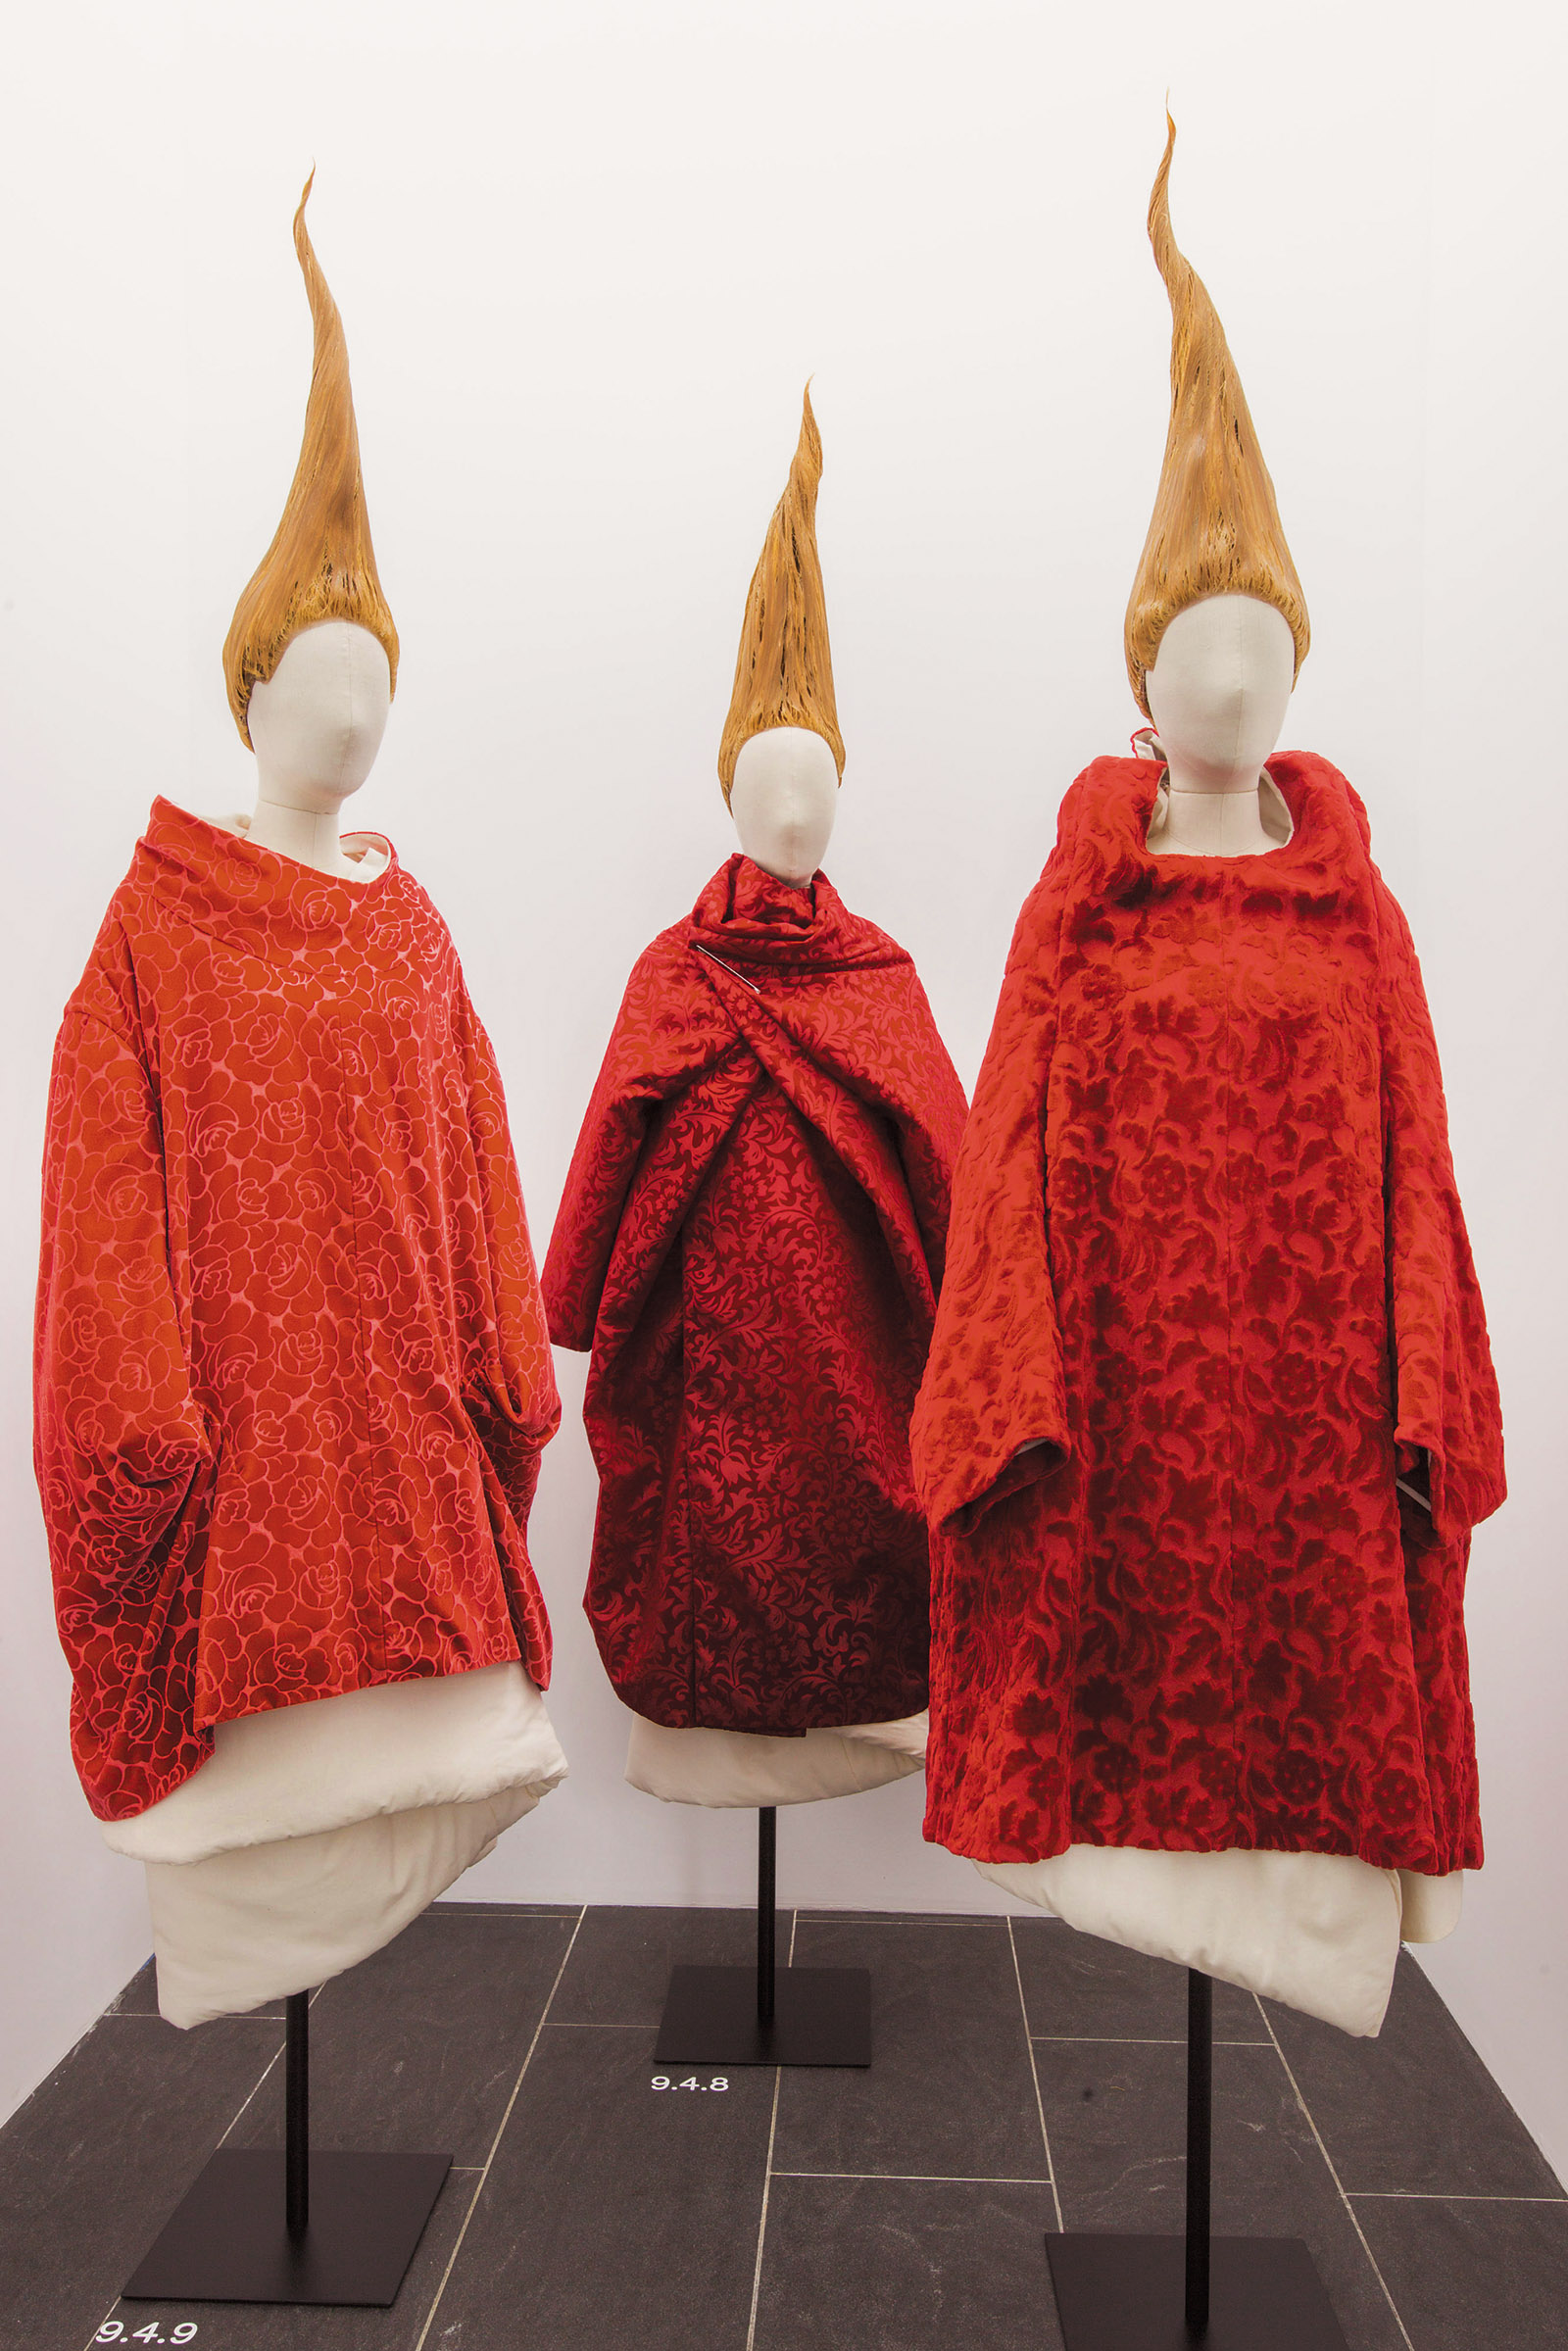 Clothes/Not Clothes: War/Peace, from ‘Rei Kawakubo/Comme des Garçons: Art of the In-Between’